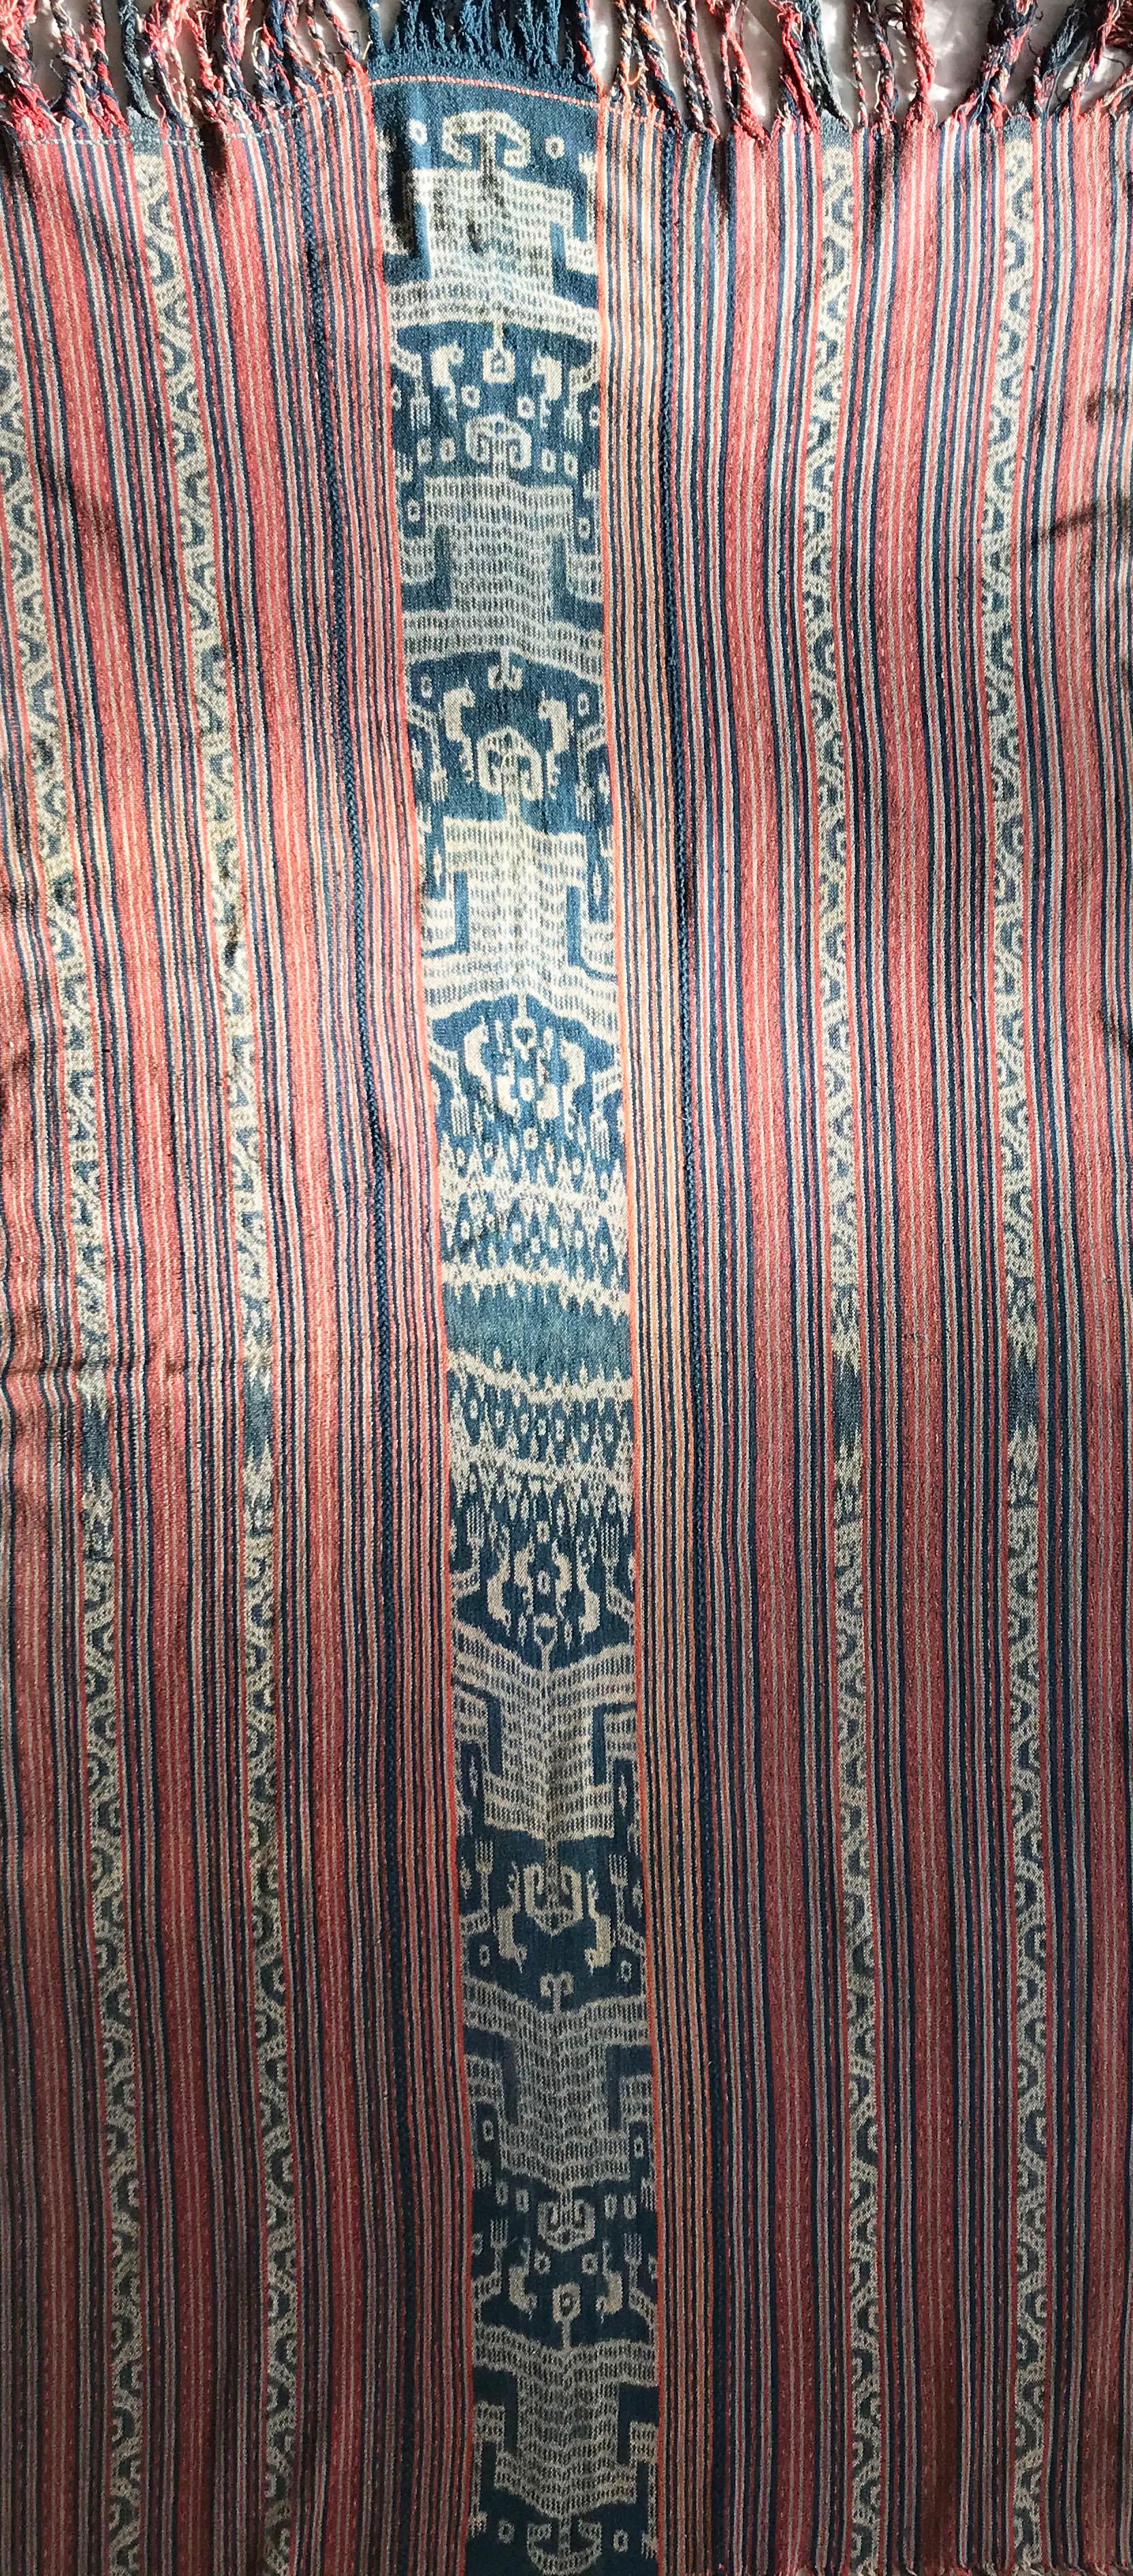 A Vintage woven Ikat cloth made using hand spun natural dyed cotton yarn on the island of Timor in Indonesia.

Comprising of 2 panels sewn together to form a larger cloth a technique often used in older ikat textiles from the region.
Featuring a